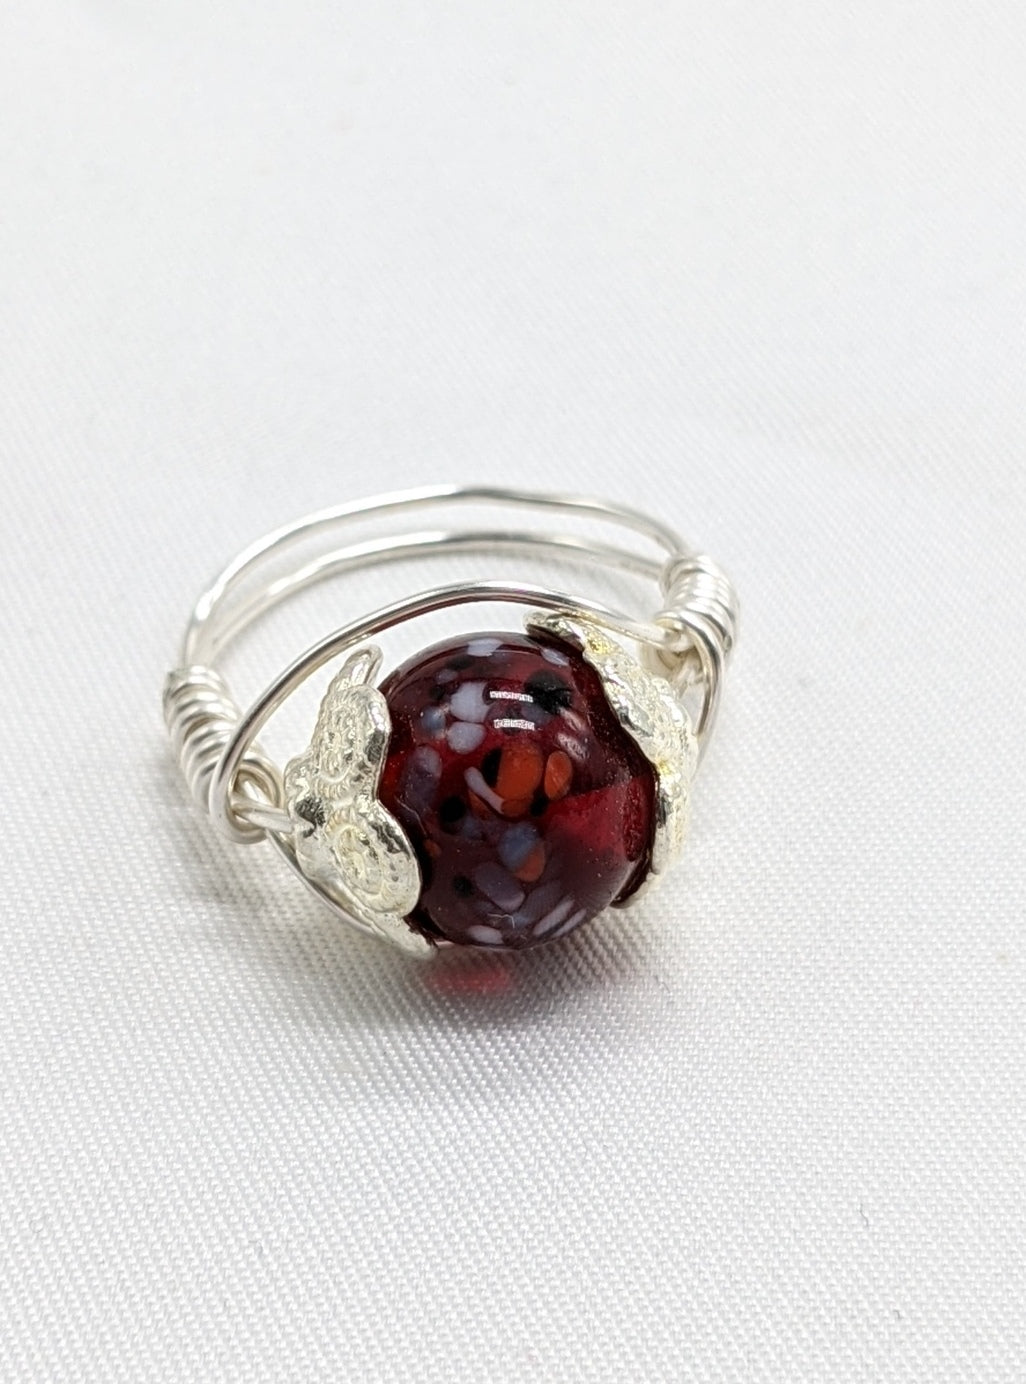 Decorative Red Bead on Silver Ring